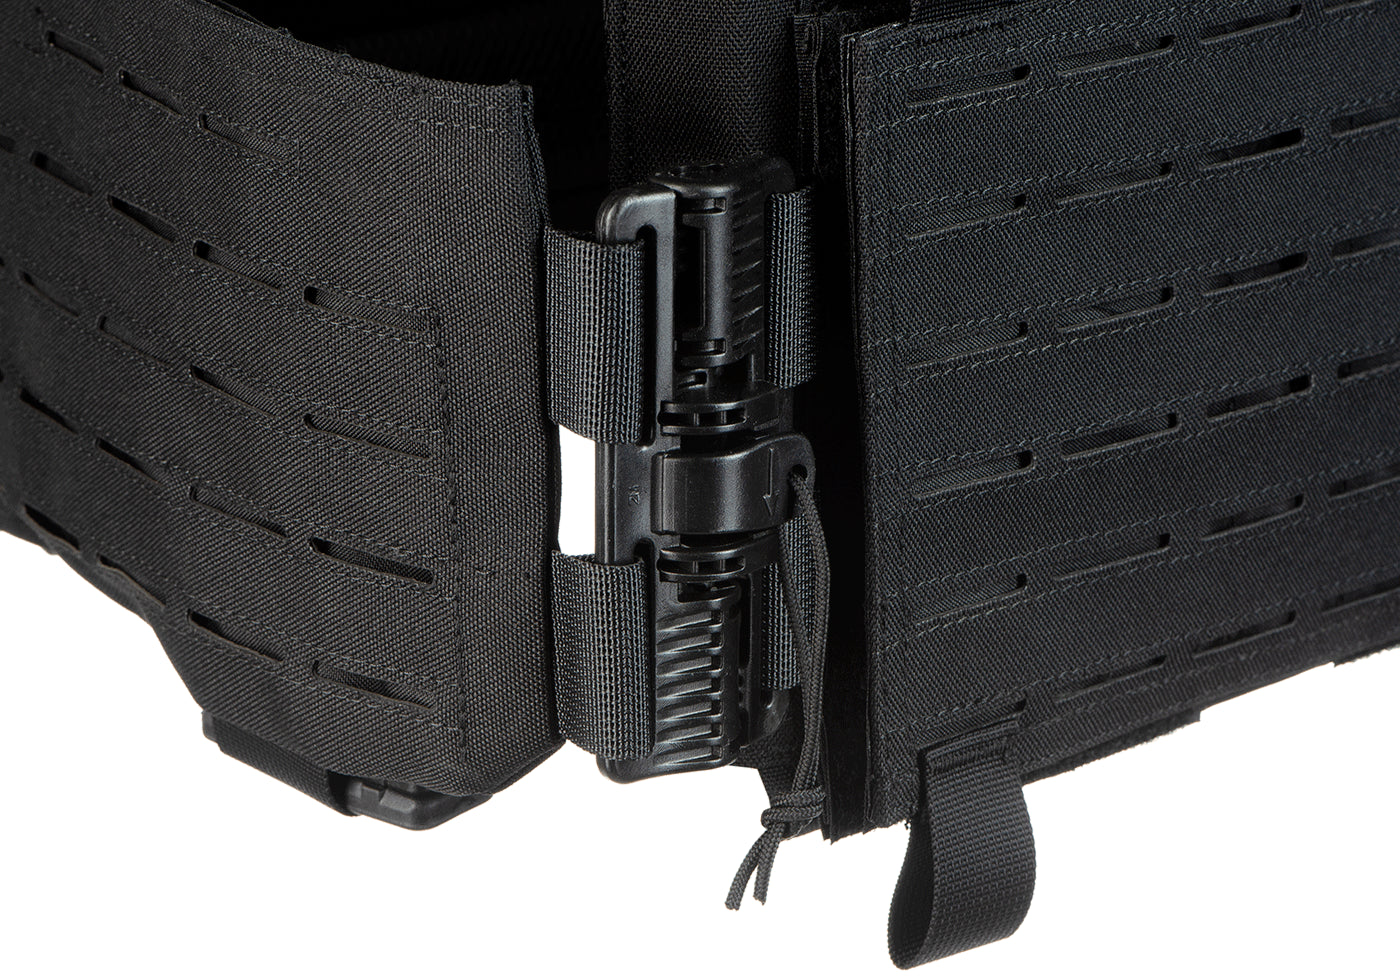 Reaper QRB Plate Carrier - Black - Invader Gear